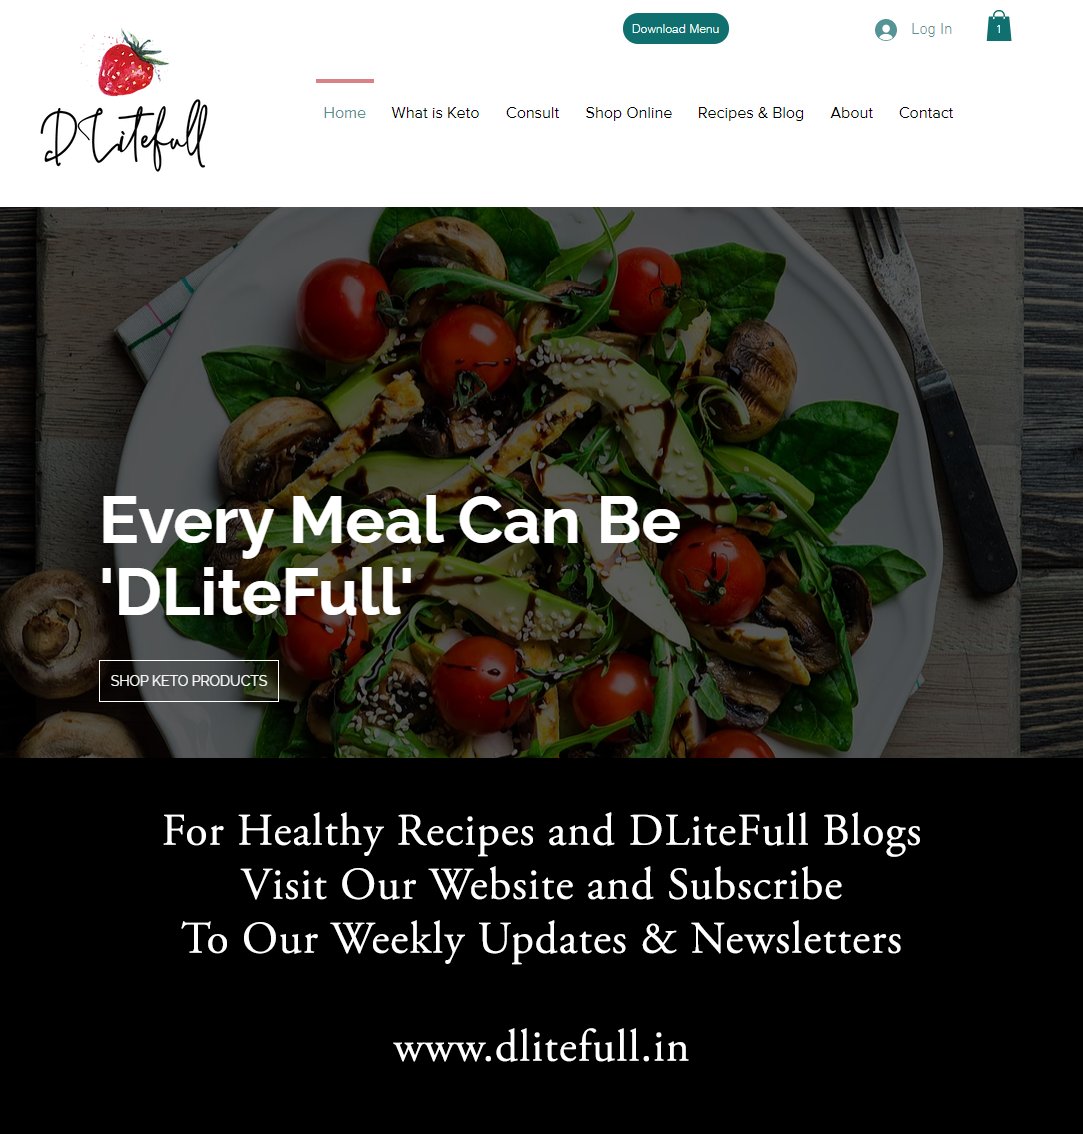 To subscribe, just visit dlitefull.in, scroll down to the very end of the page and enter your email id and hit ‘subscribe now'!

#subscribe #newsletter #recipes #blogs #emailsubscription #newslettersubscription #email #emailupdates #updates #subscribenow #dlitefullblog